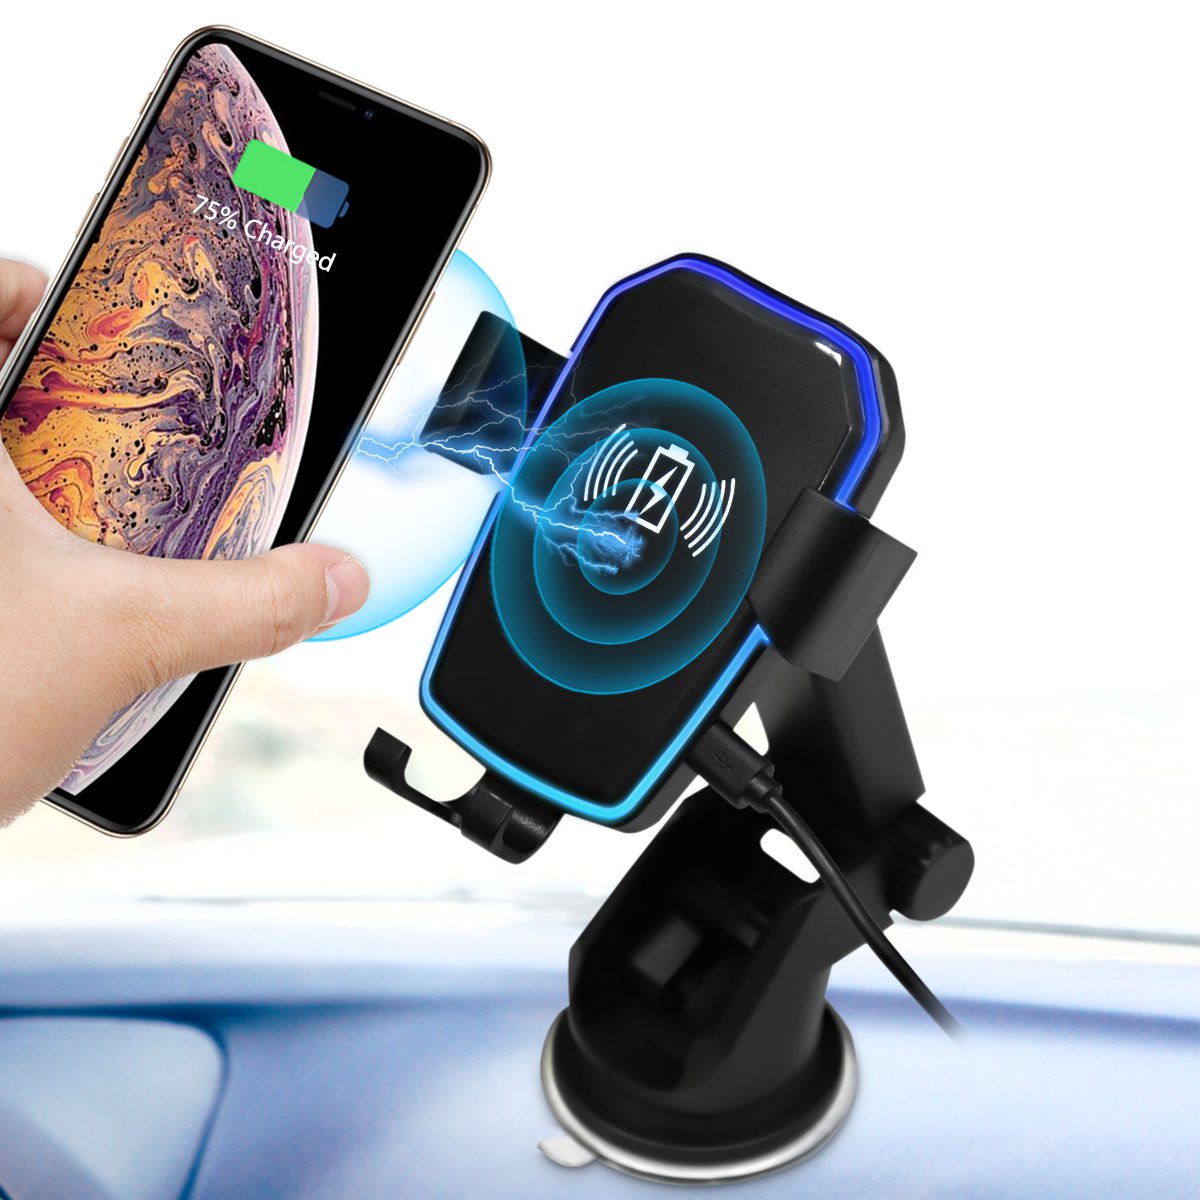 

Universal 10W Qi Wireless Fast Charge Gravity Auto Lock Suction Car Holder for iPhone Mobile Phone